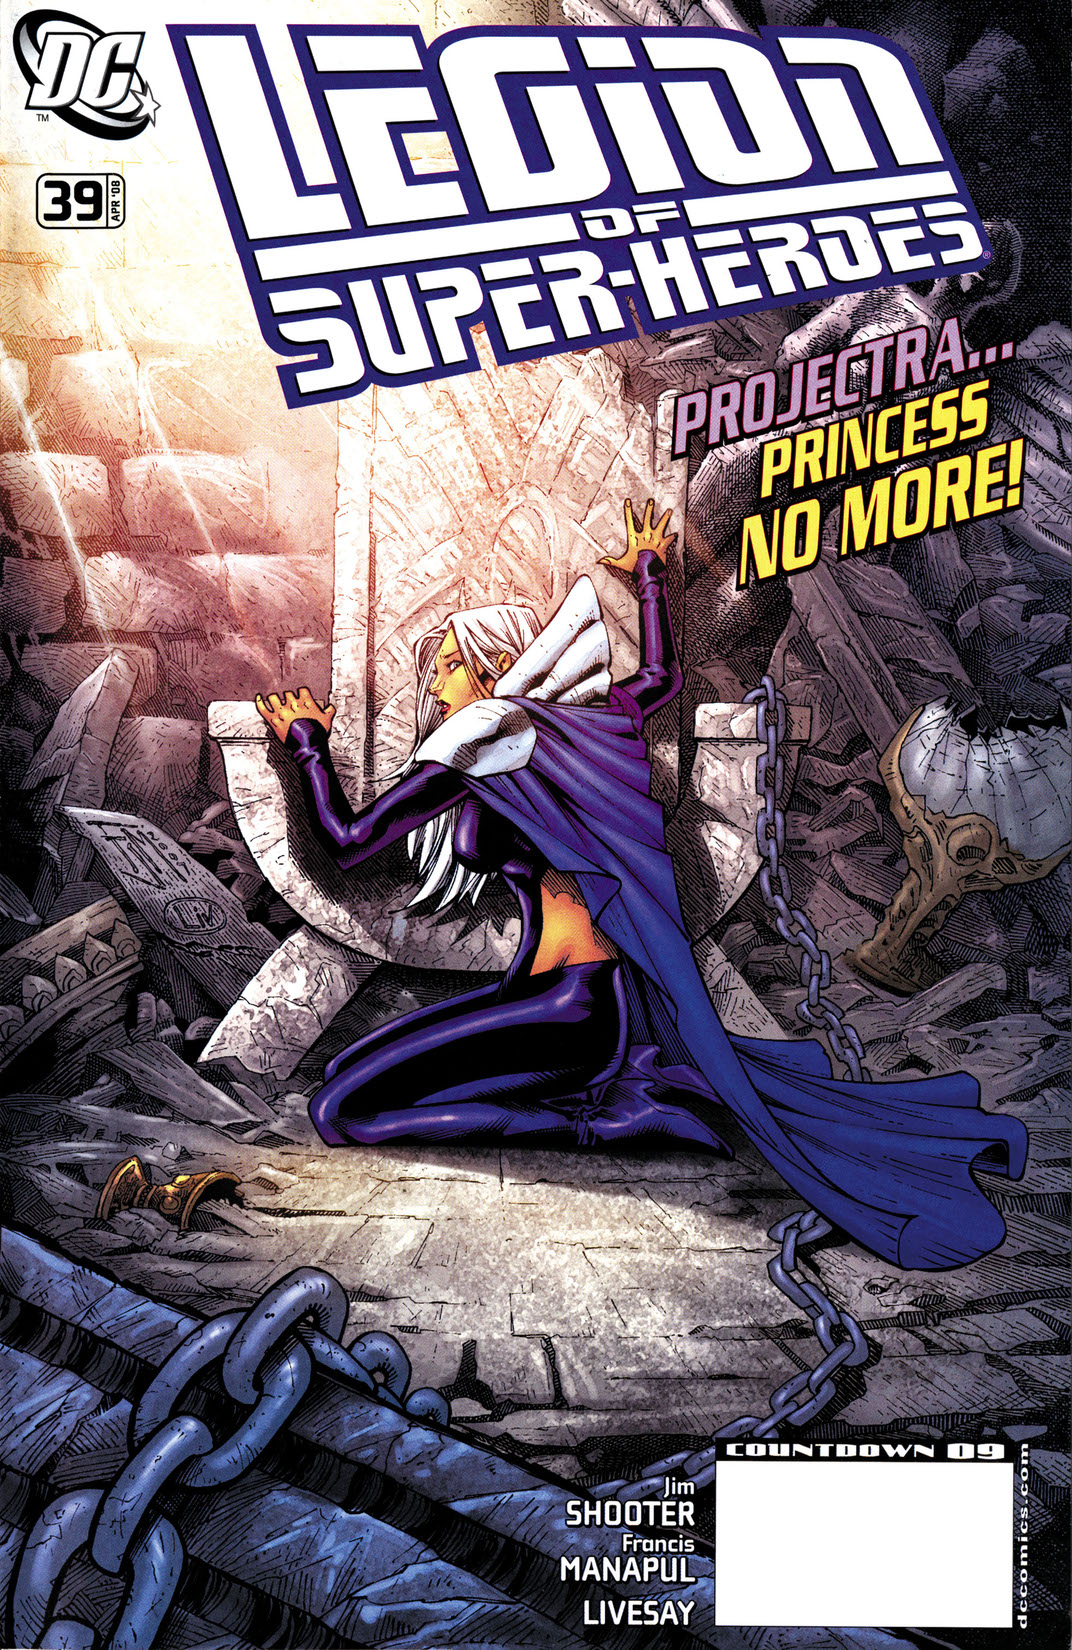 Legion of Super-Heroes (2007-) #39 preview images